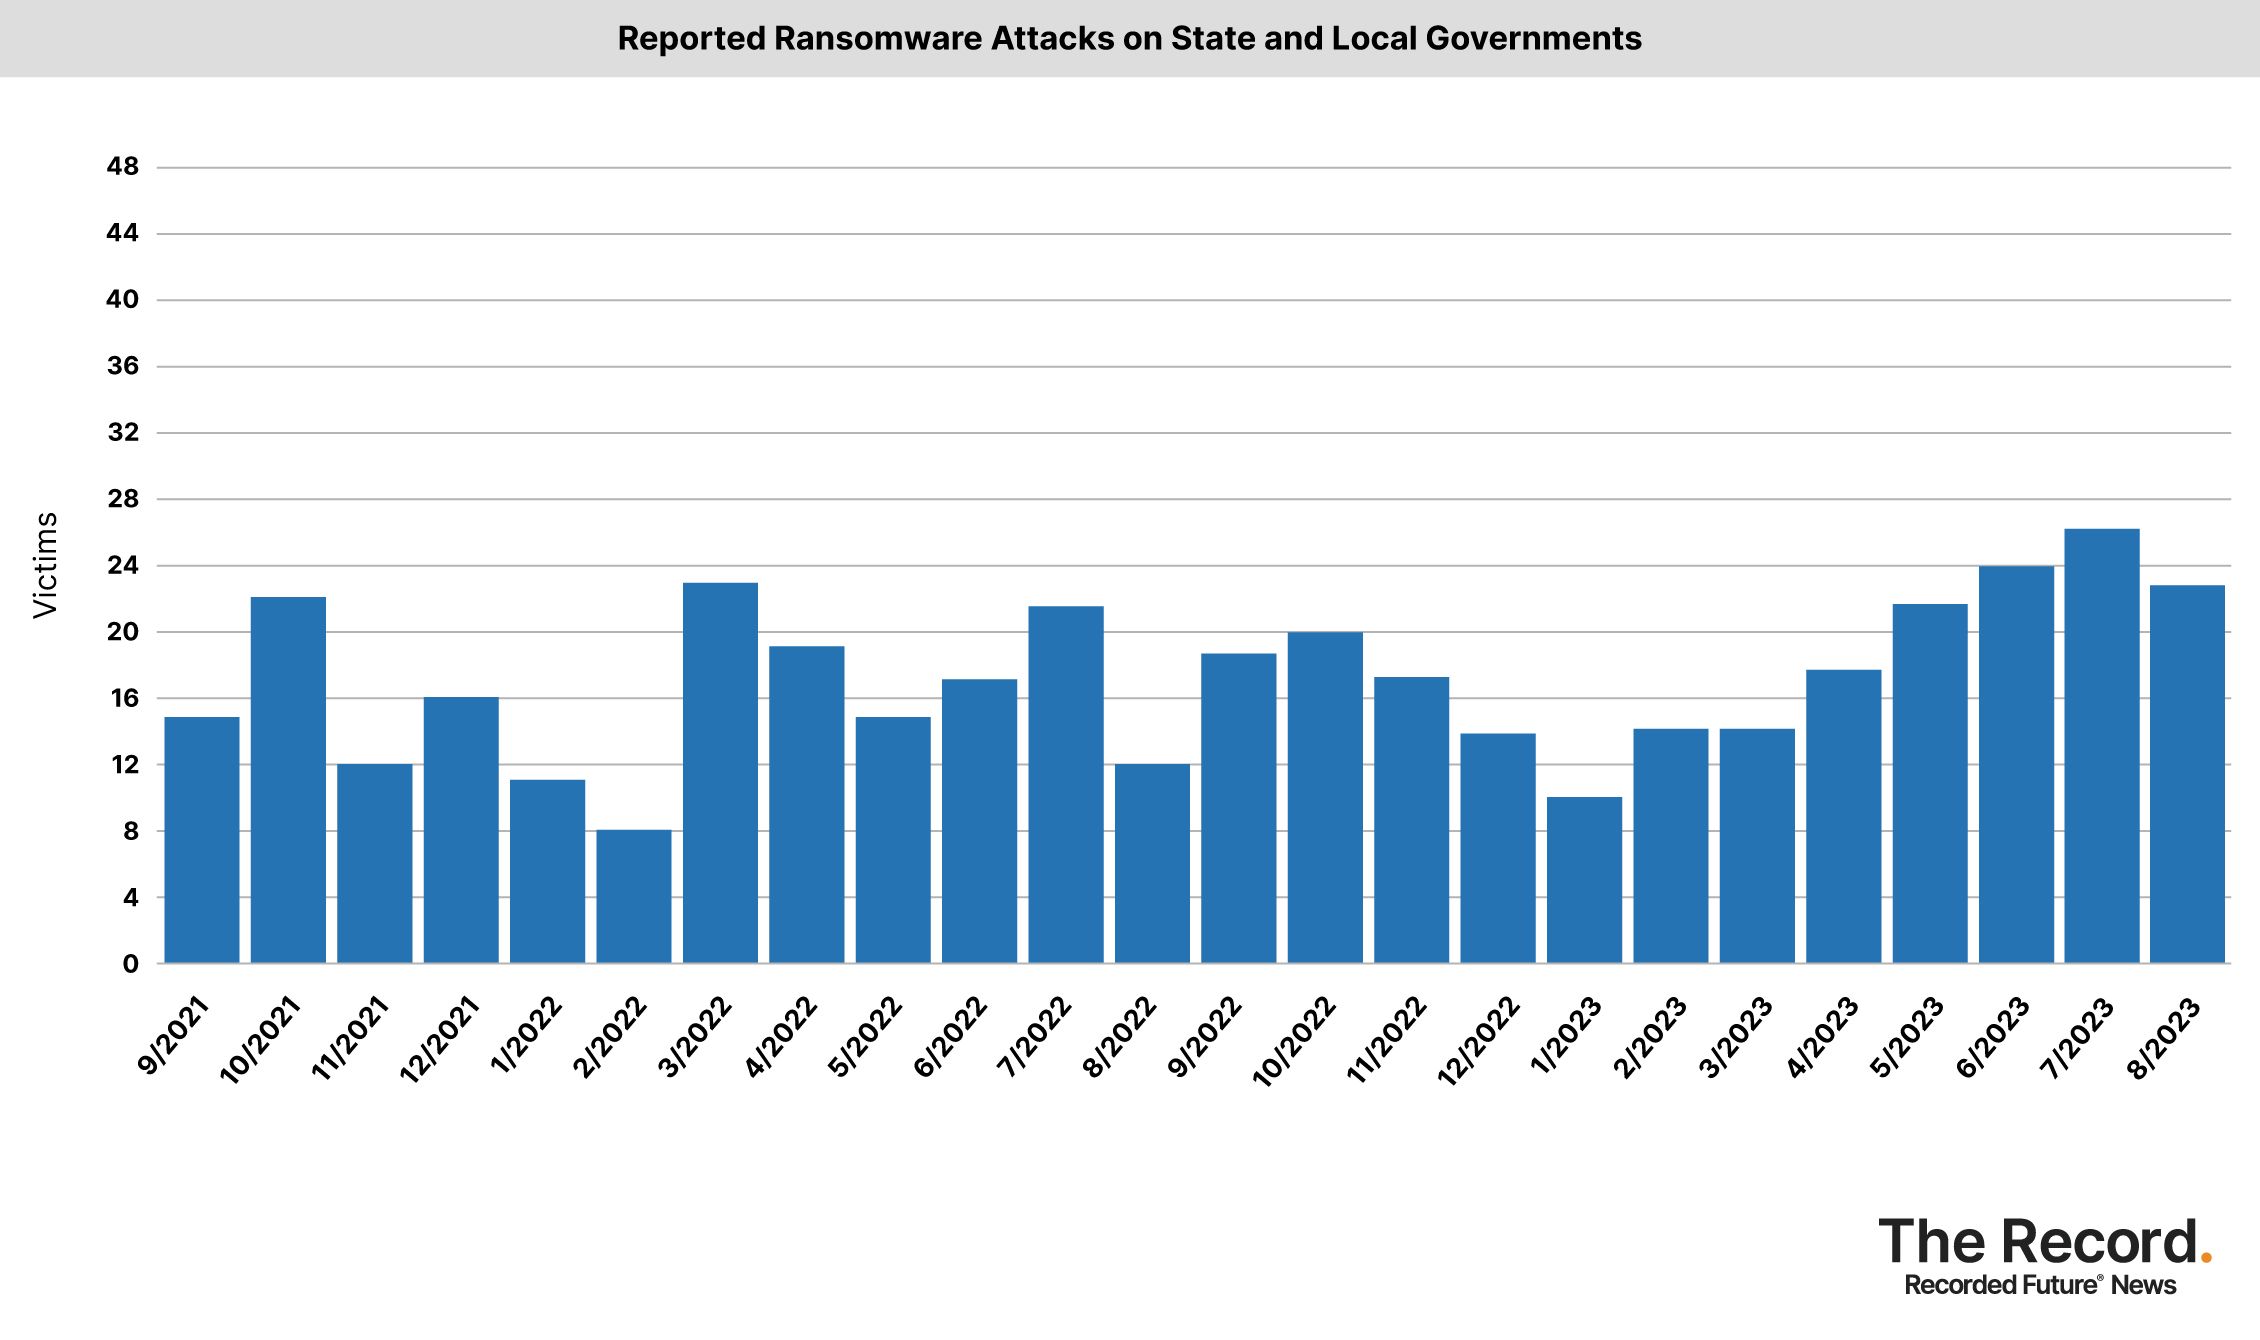 2023_0907 - Ransomware Tracker - Reported Ransomware Attacks on State and Local Governments.jpg